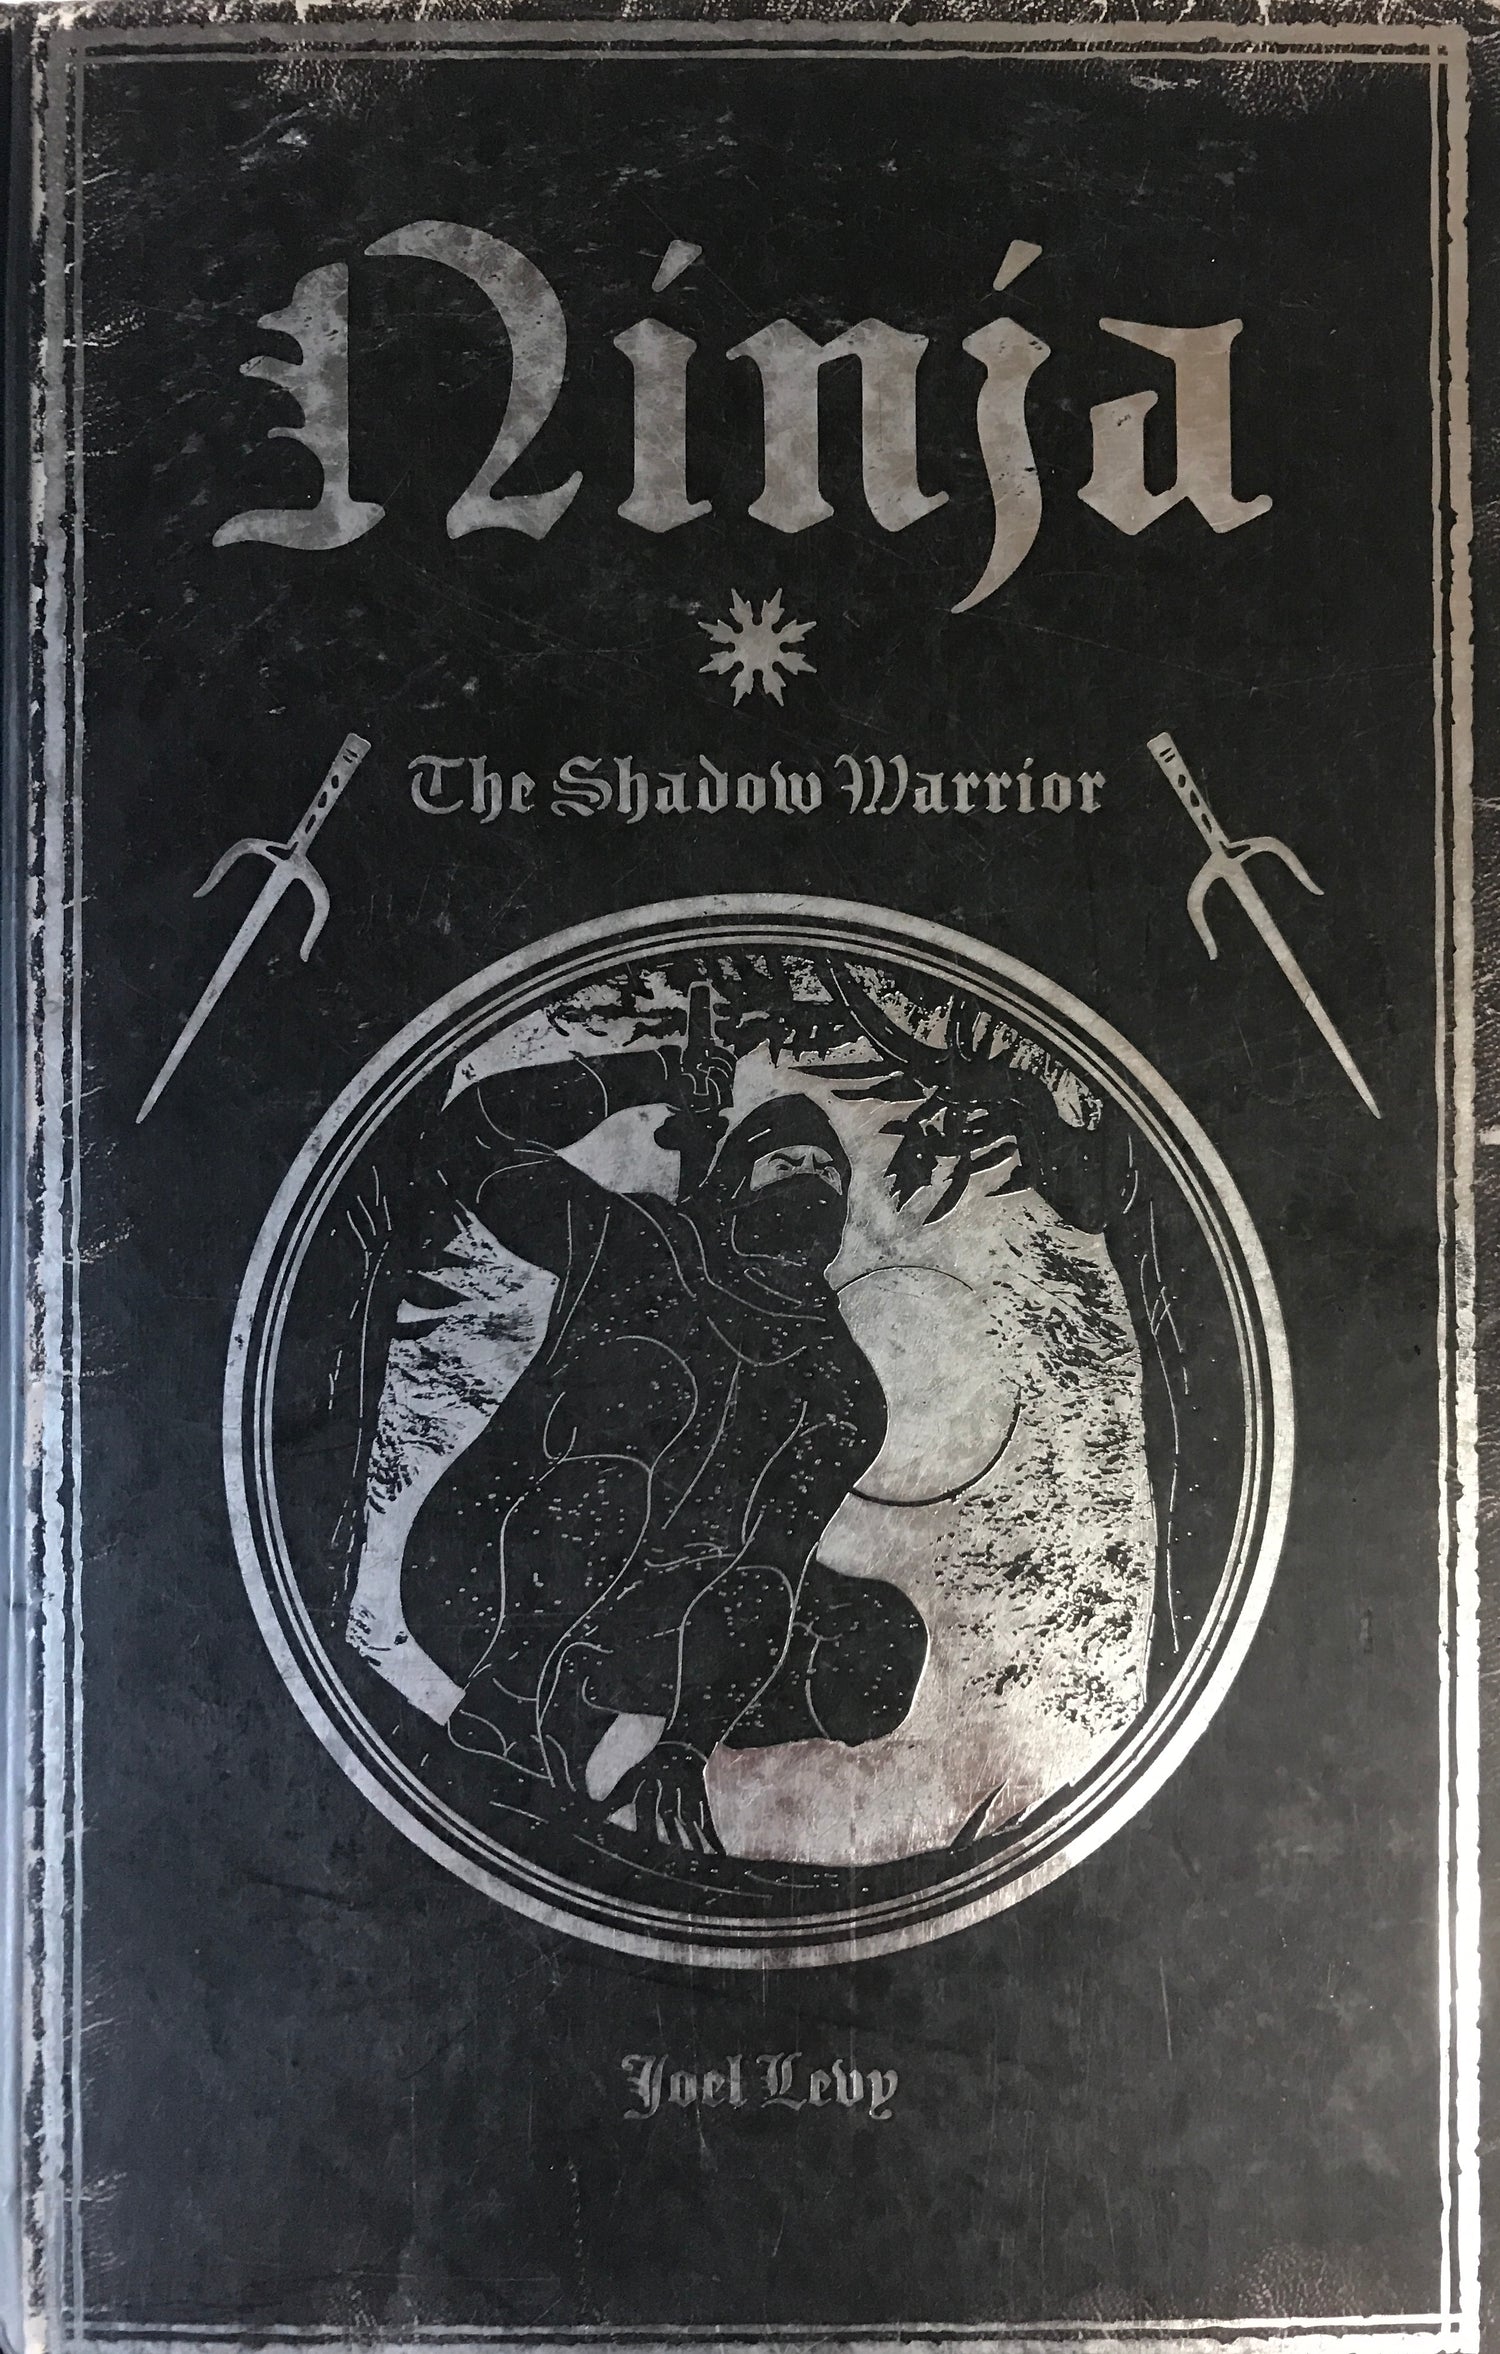 Ninja: The Shadow Warrior Book by Joel Levy (Preowned) - Budovideos Inc